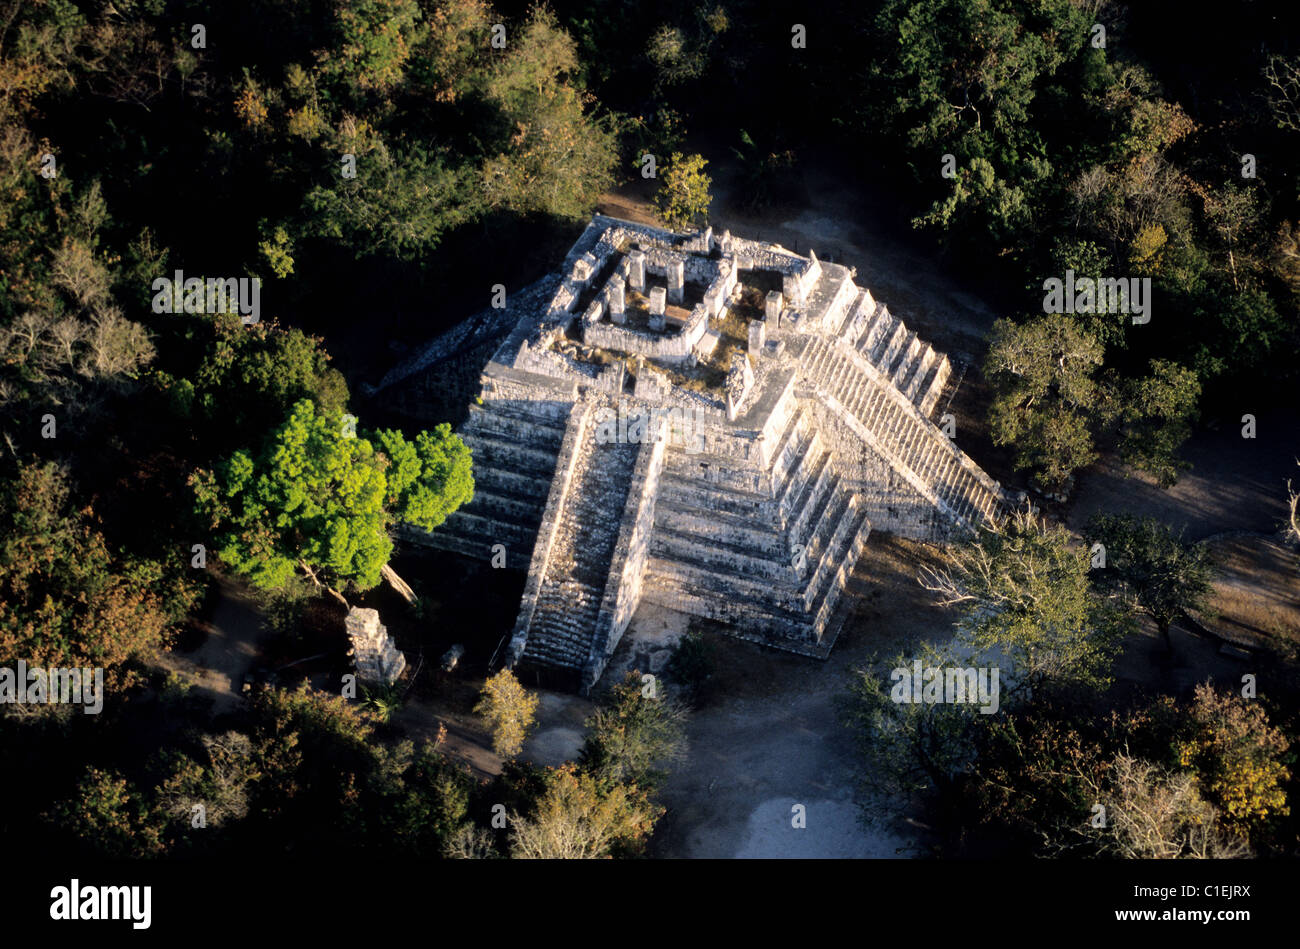 Mexico Yucatan State archaeological site of Chichen Itza listed as World Heritage by UNESCO Ossuary or Grave of the High Priest Stock Photo